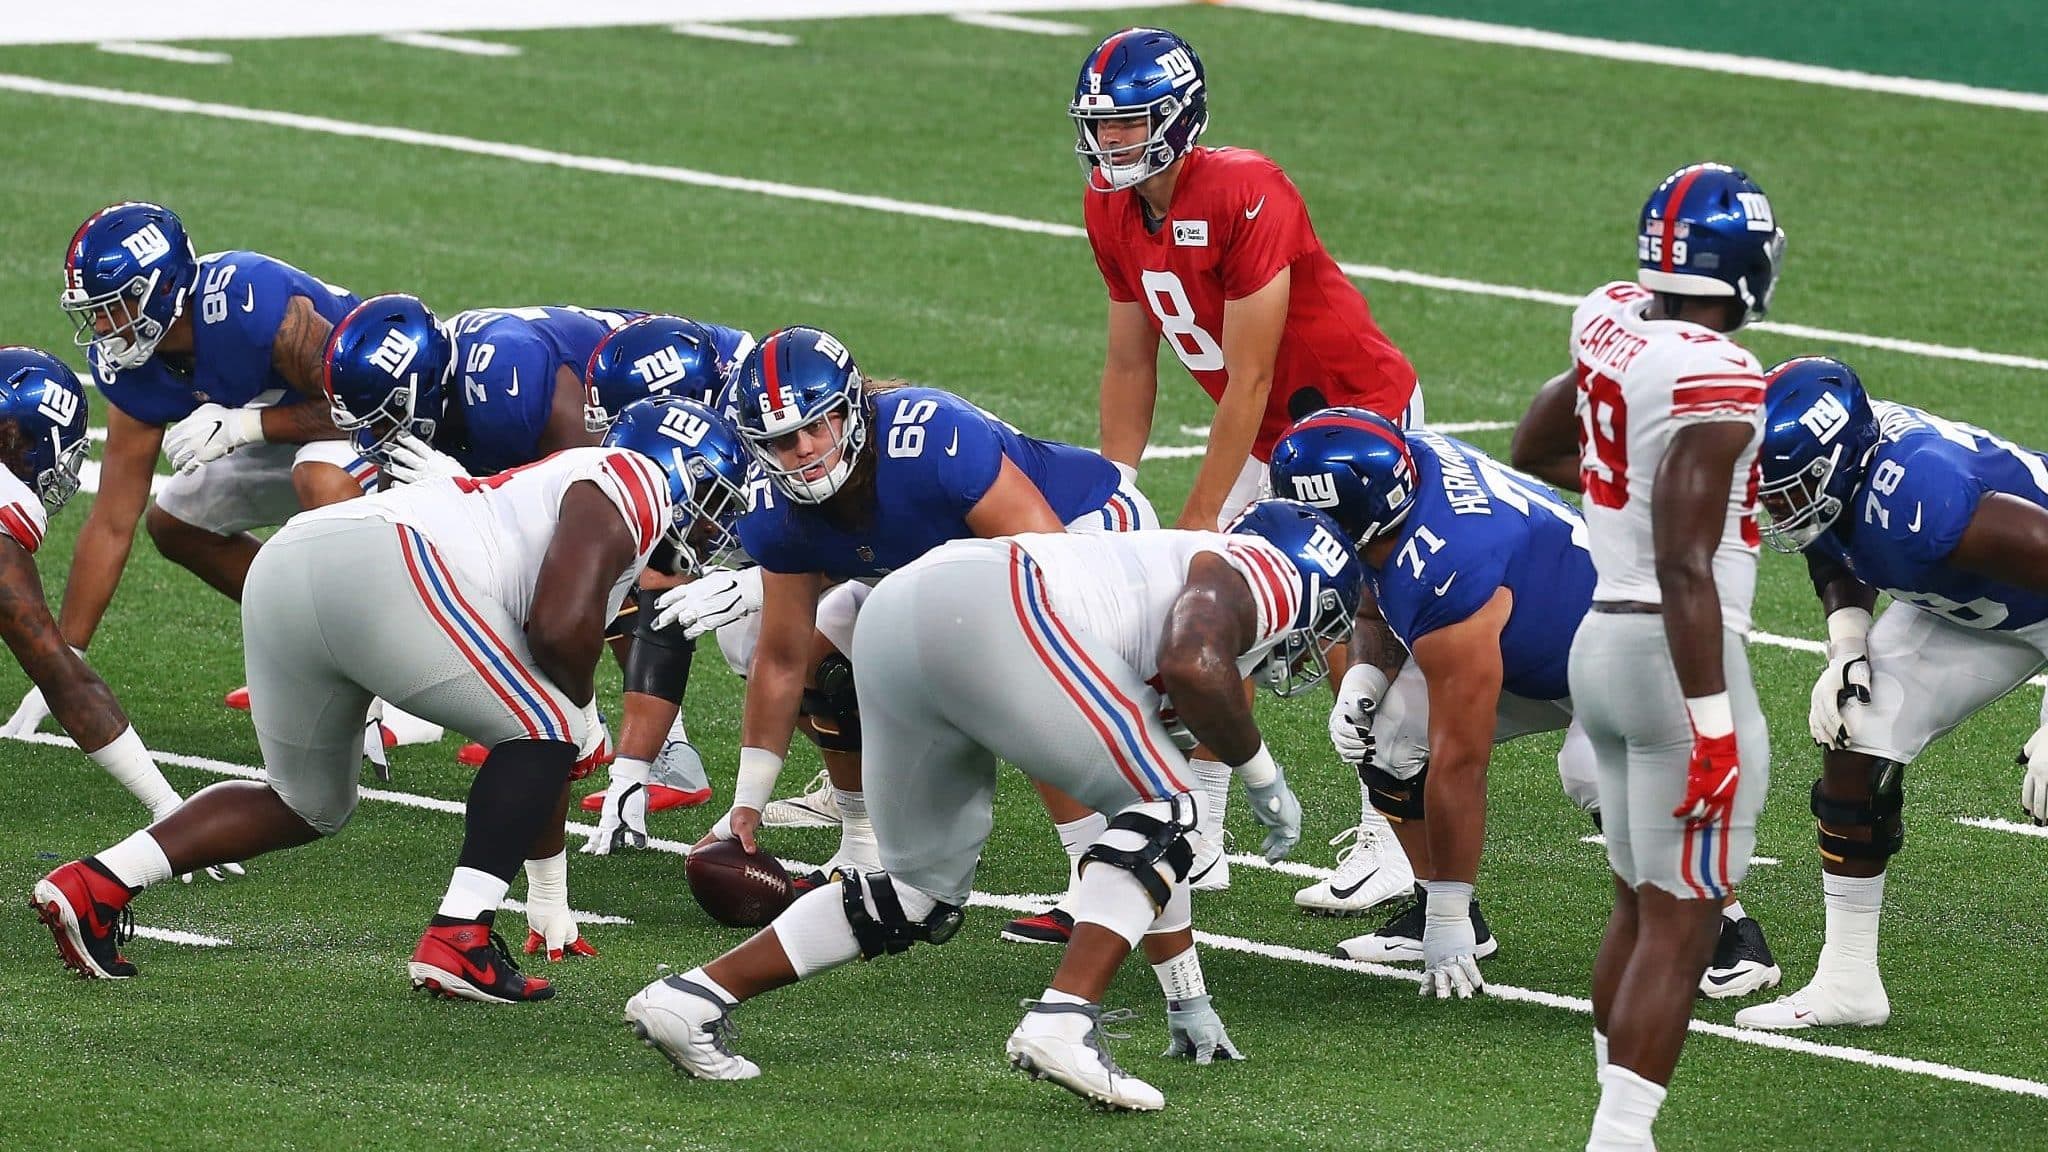 EAST RUTHERFORD, NEW JERSEY - AUGUST 28: Daniel Jones #8 of the New York Giants looks to pass the ball during the Blue and White scrimmage at MetLife Stadium on August 28, 2020 in East Rutherford, New Jersey.